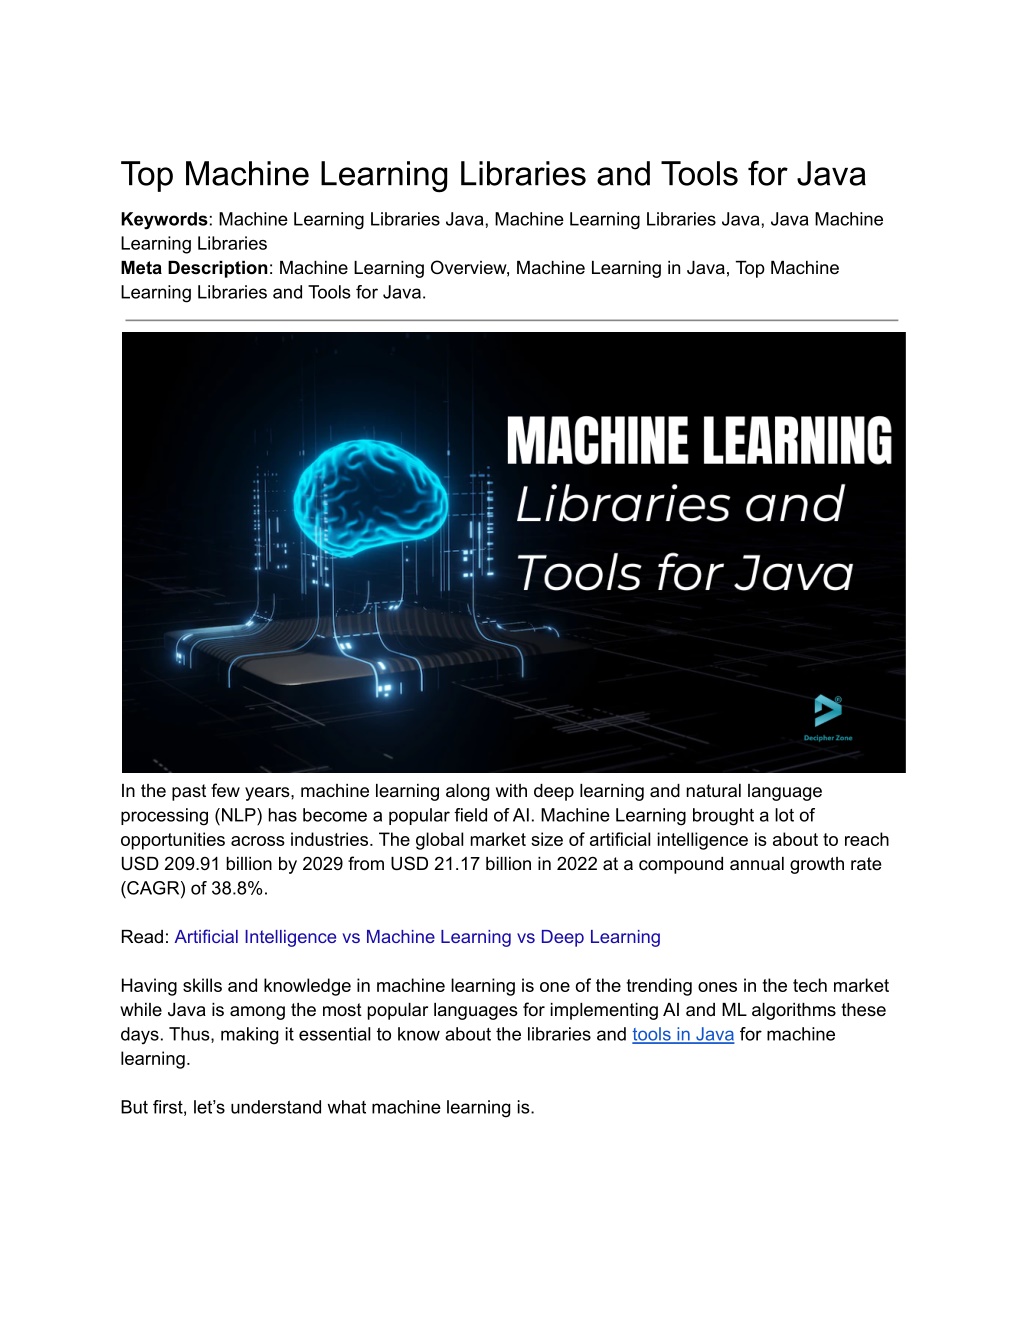 Ppt Top 15 Machine Learning Libraries And Tools For Java Powerpoint Presentation Id12038368 1158